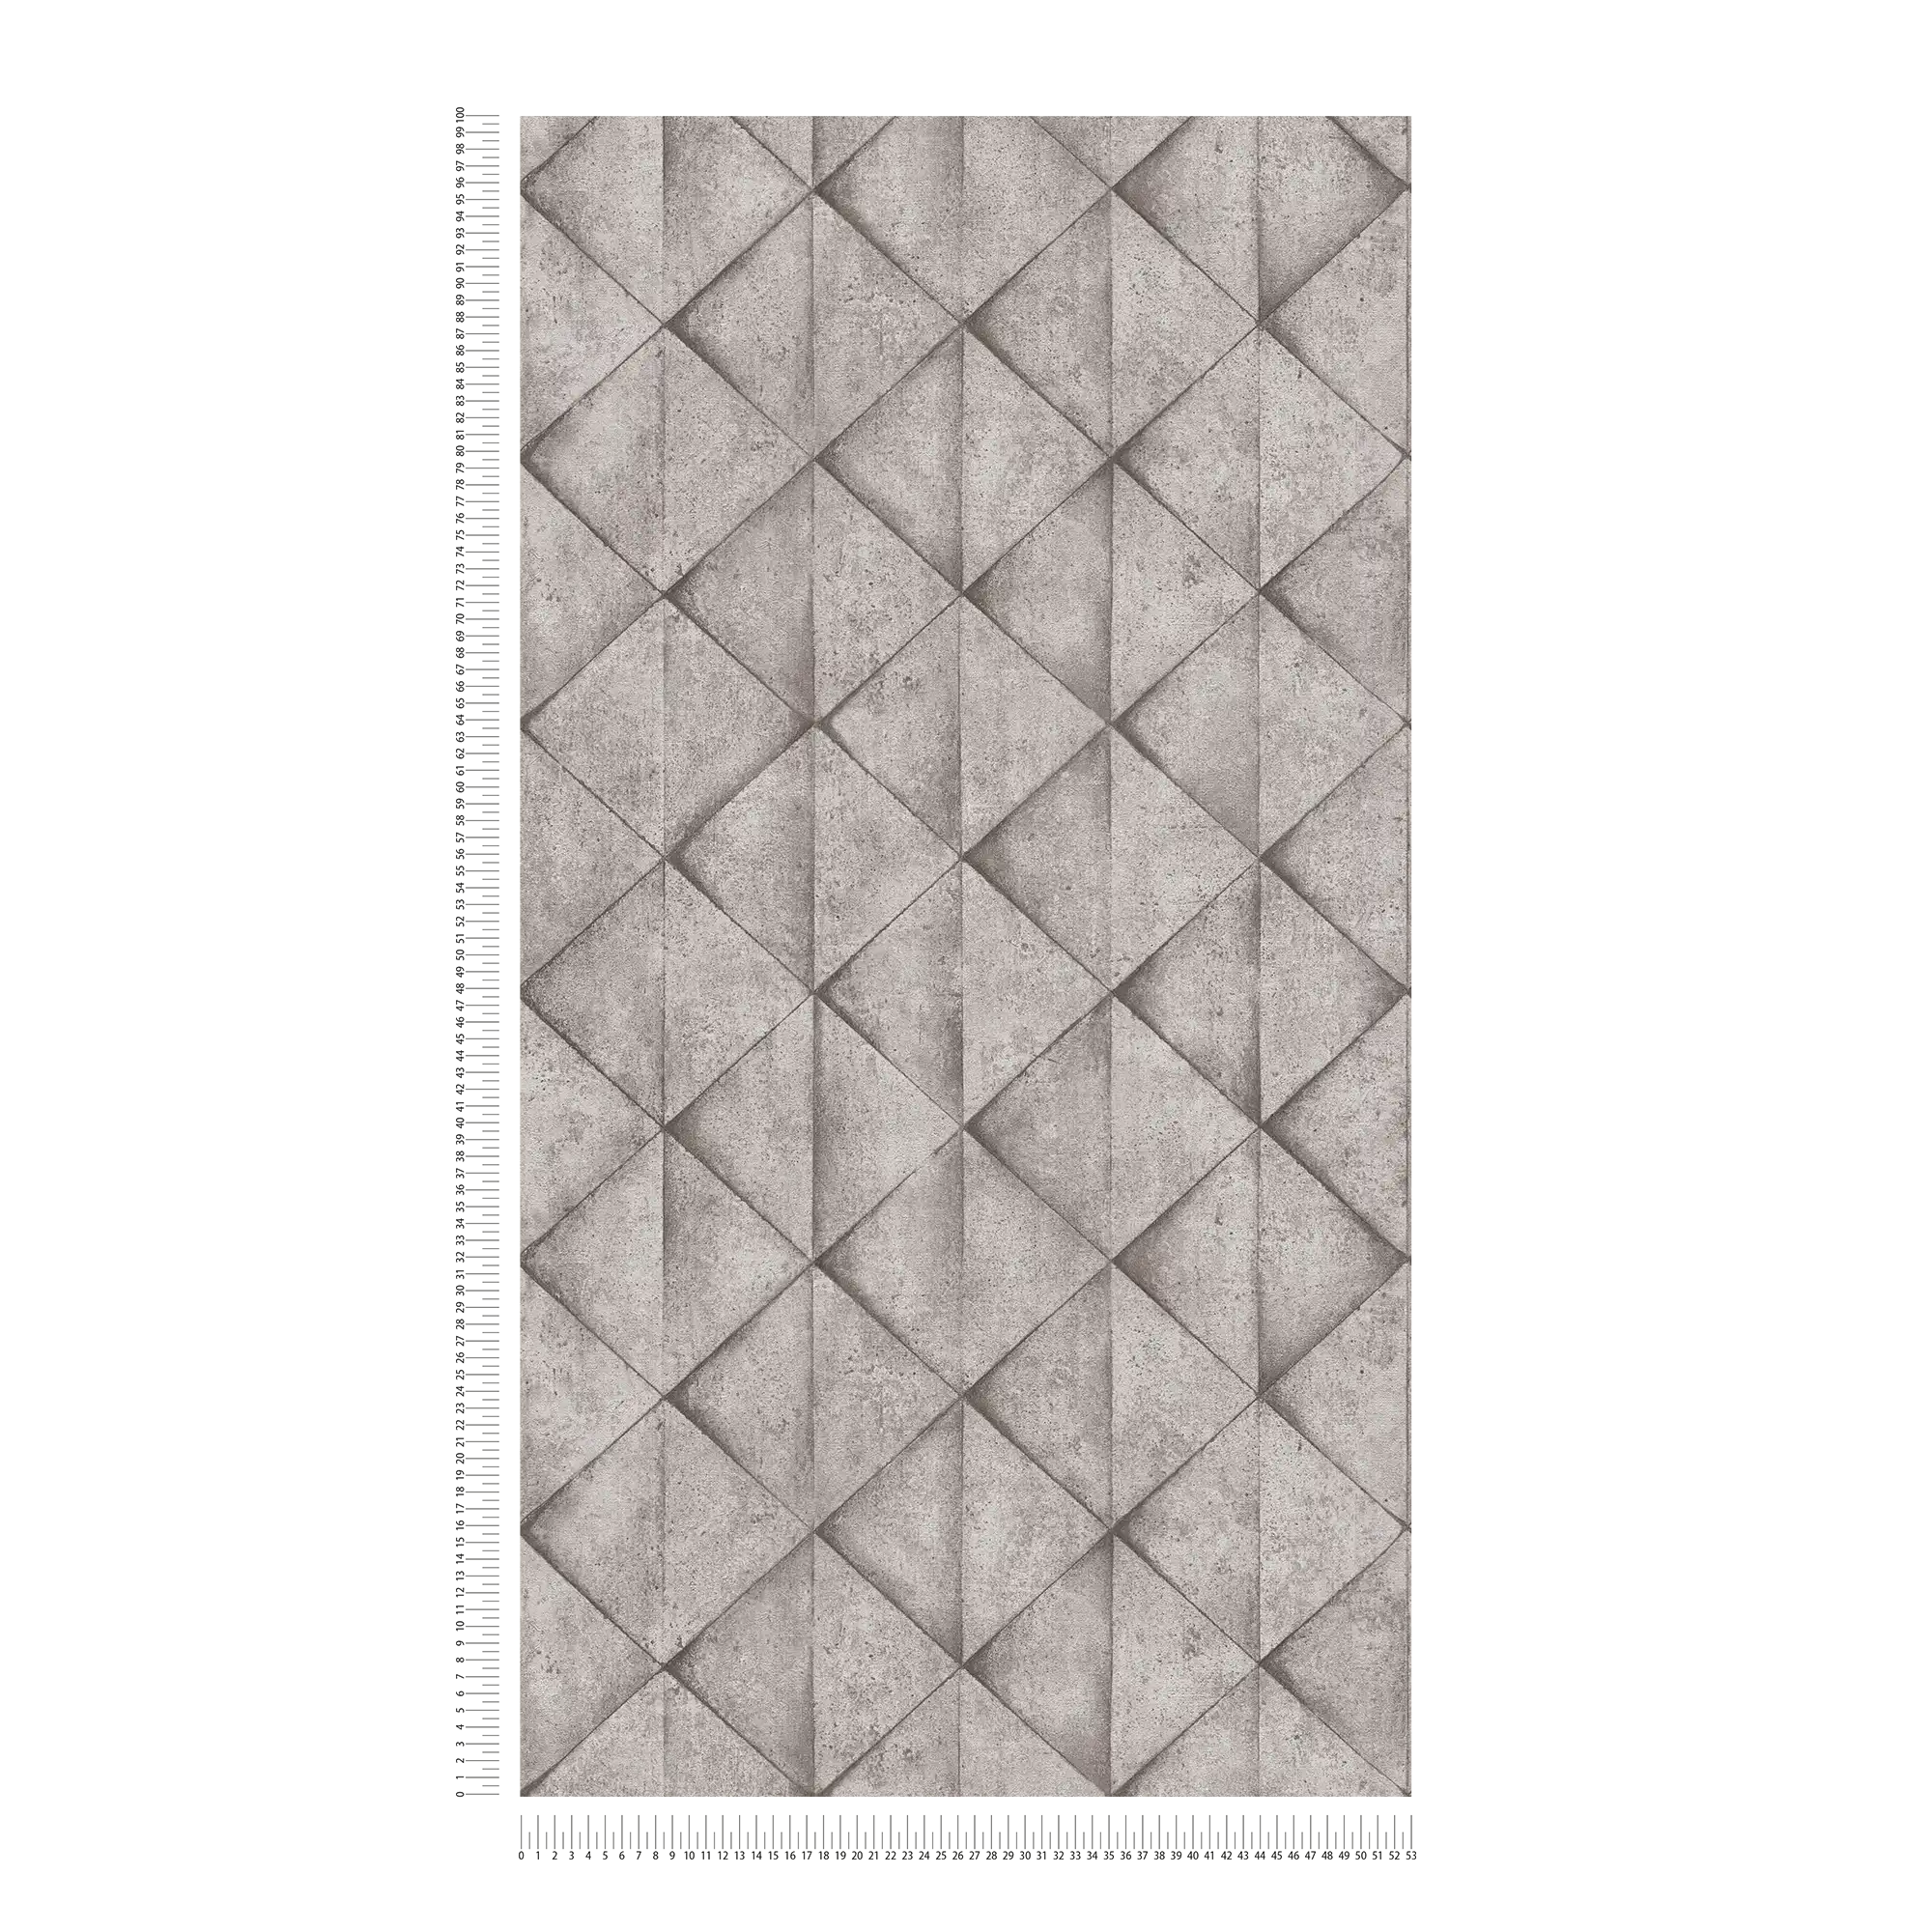             Wallpaper with concrete tiles & 3D effect - grey, anthracite
        